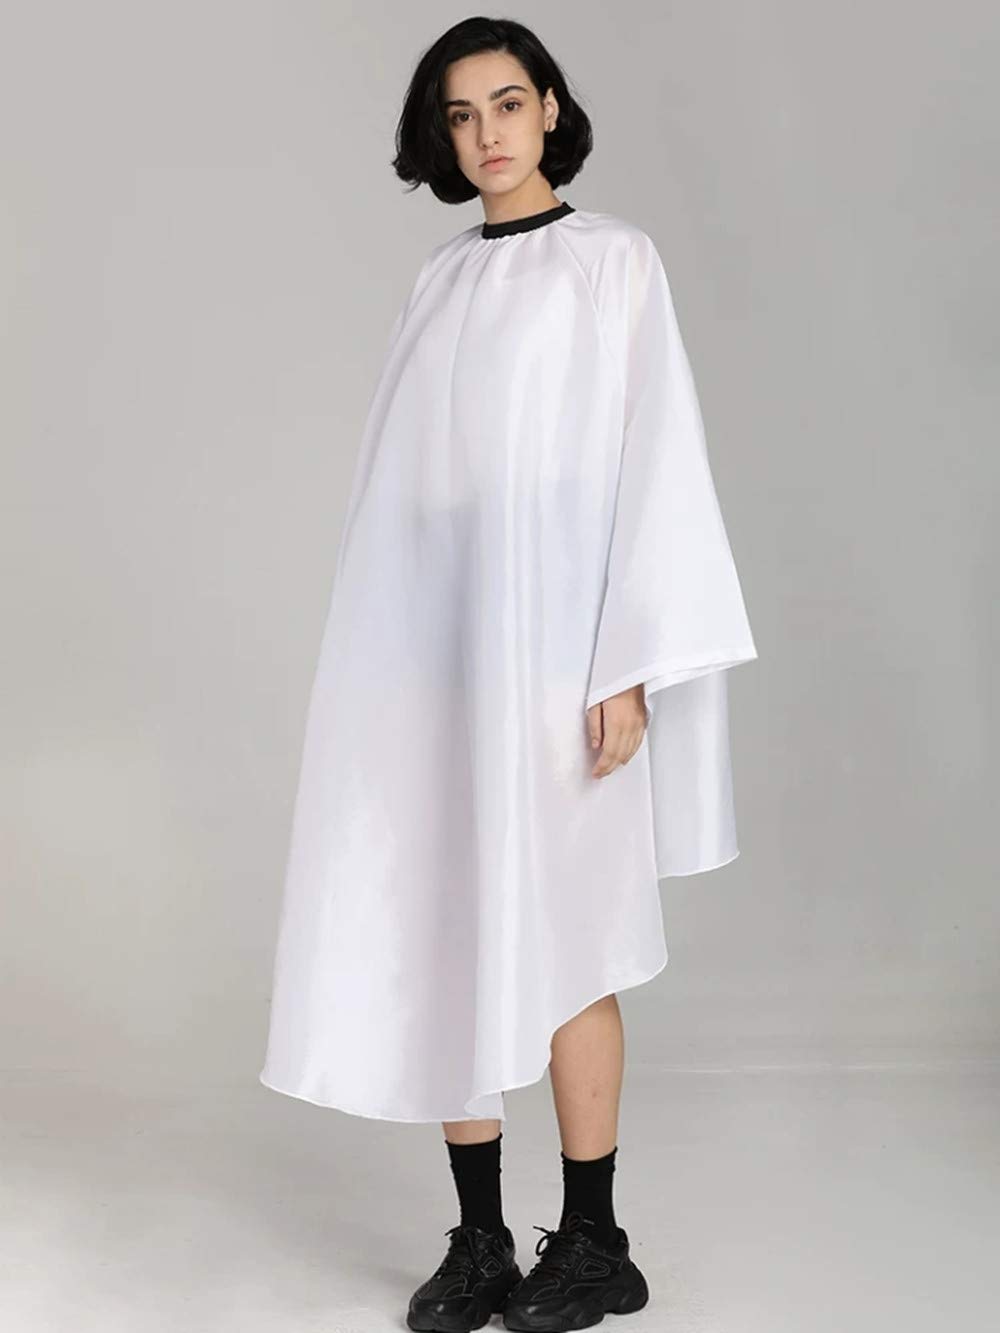 izzycka Hair Cutting Cape for Adults-Nylon Waterproof Large Salon Capes for  Hair Stylit-Grey Barber Cape-With Adjustable Snap Closure-56 x 64inch Hair